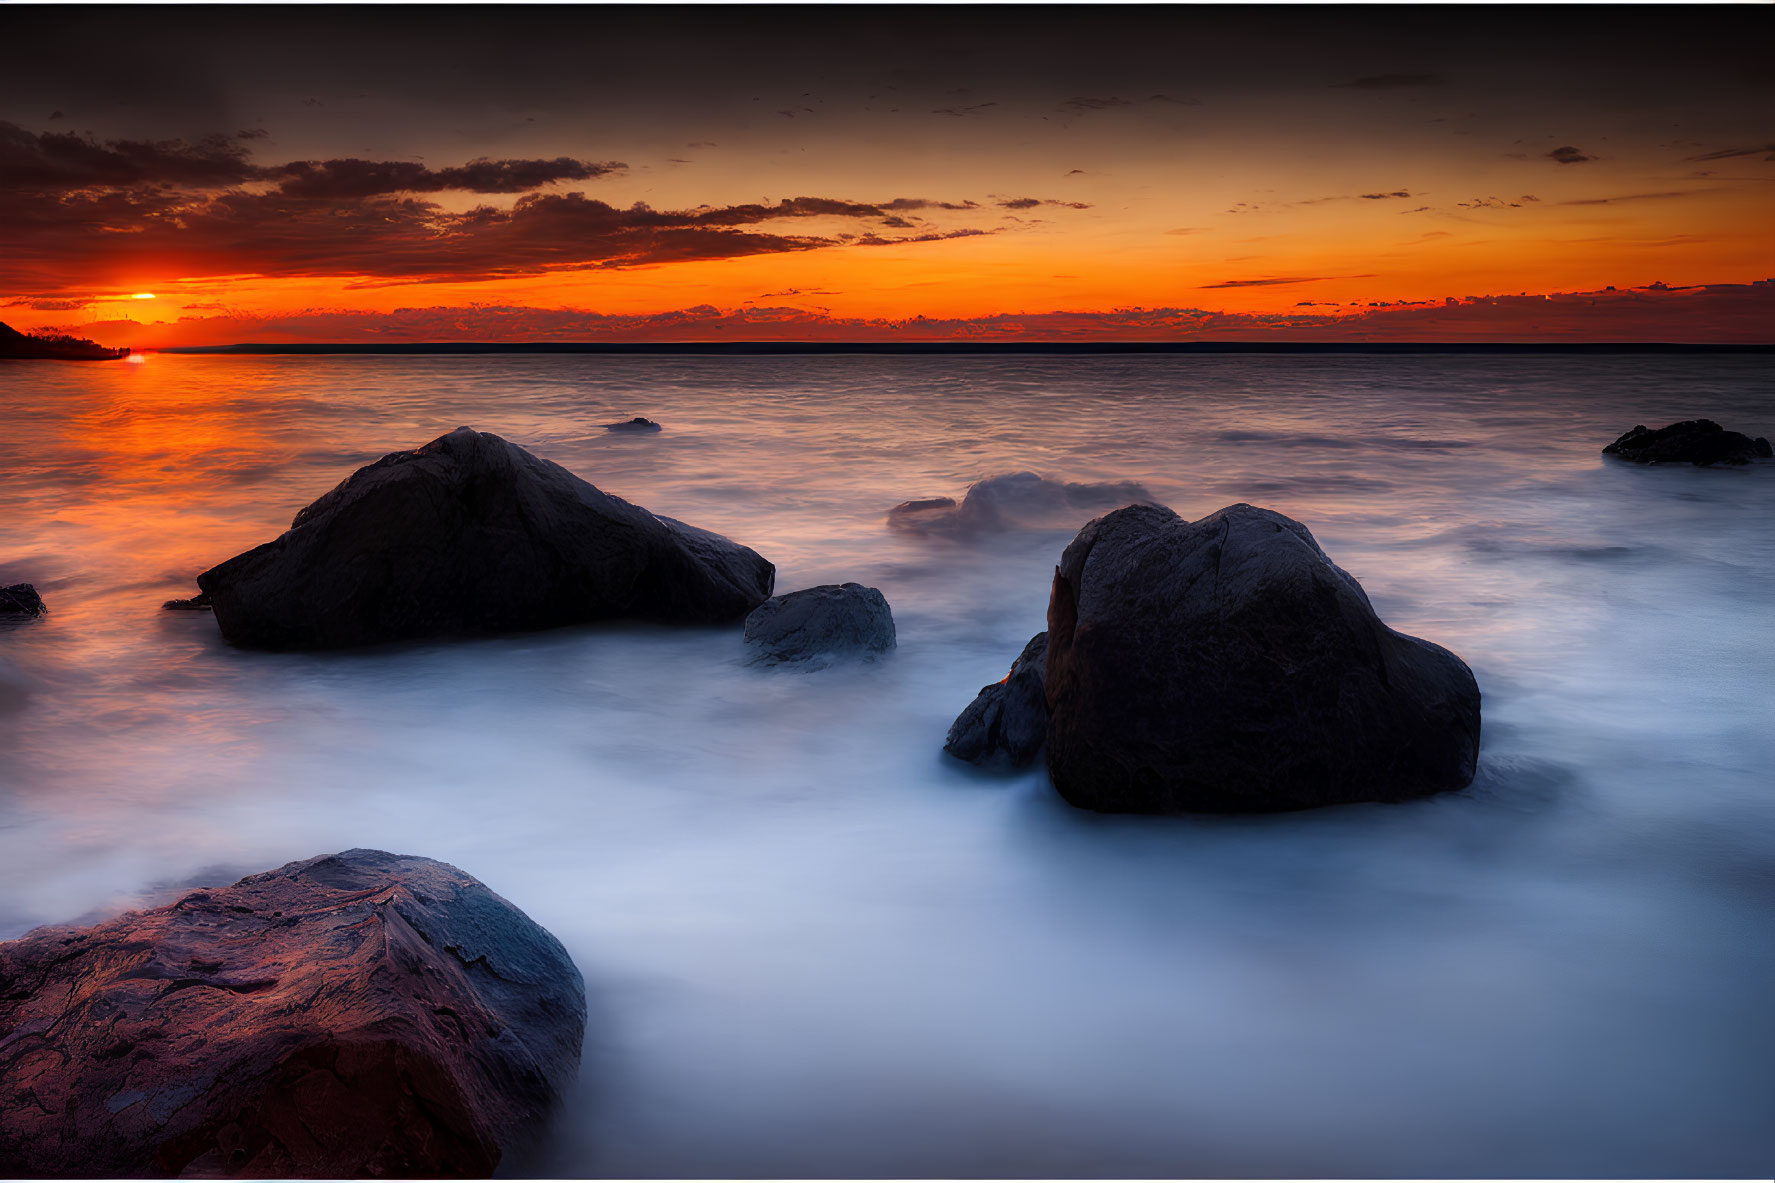 Tranquil sunset scene with orange hues over calm sea and silhouetted rocks